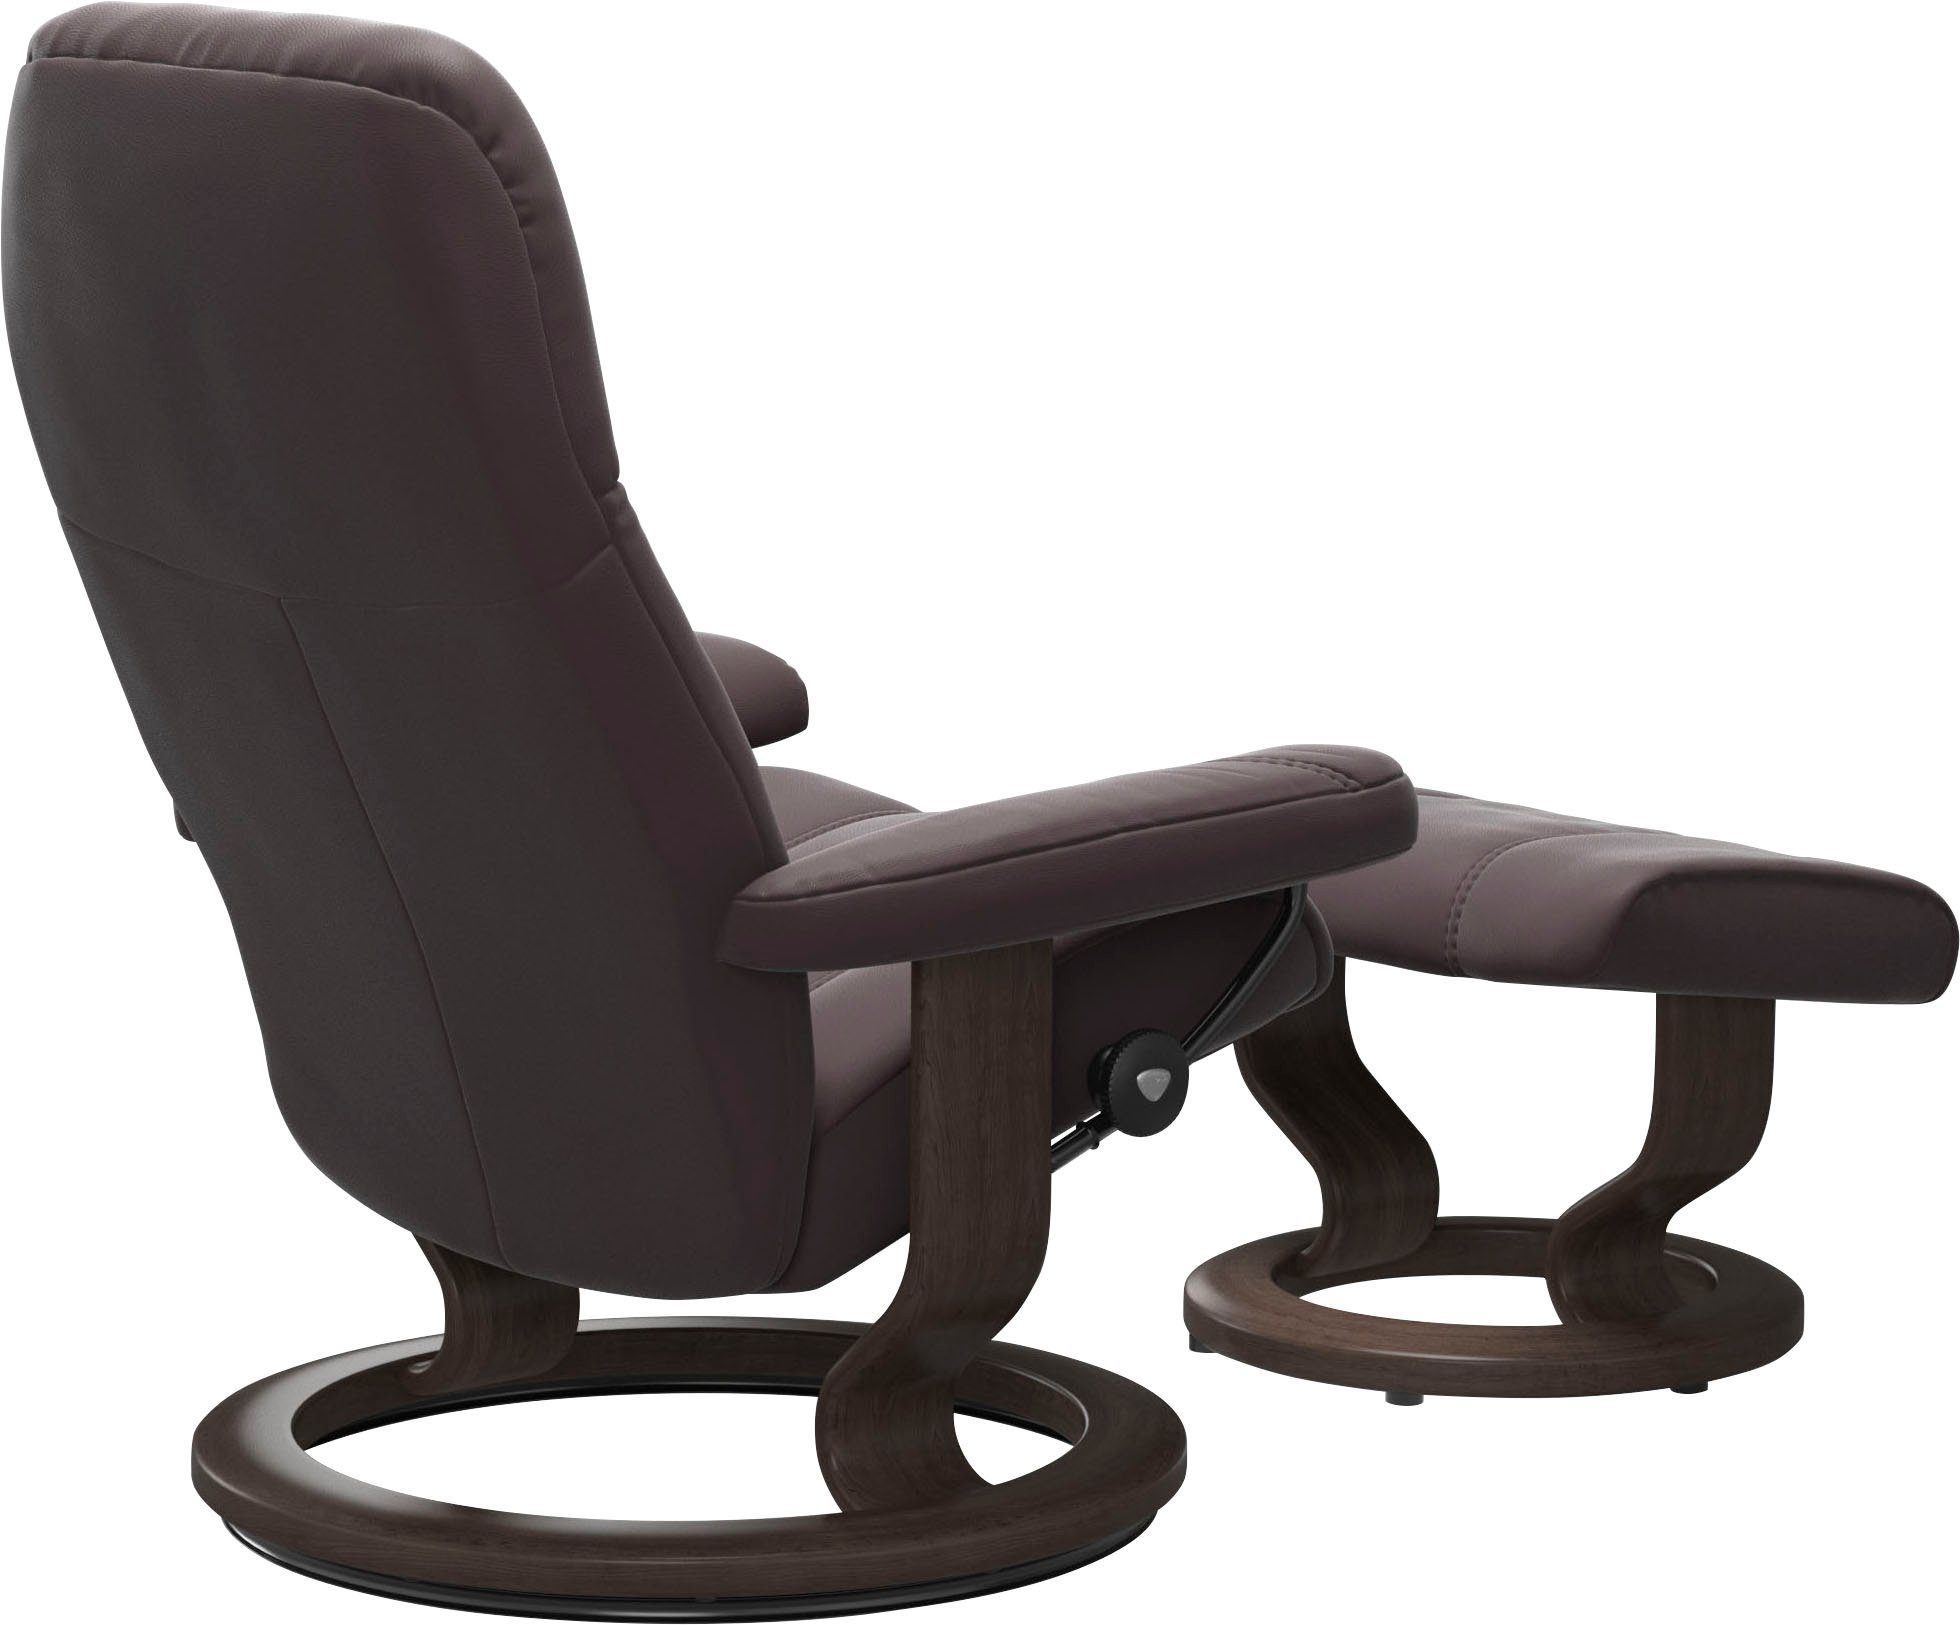 Wenge Größe M, Classic mit Gestell Consul, Stressless® Relaxsessel Base,